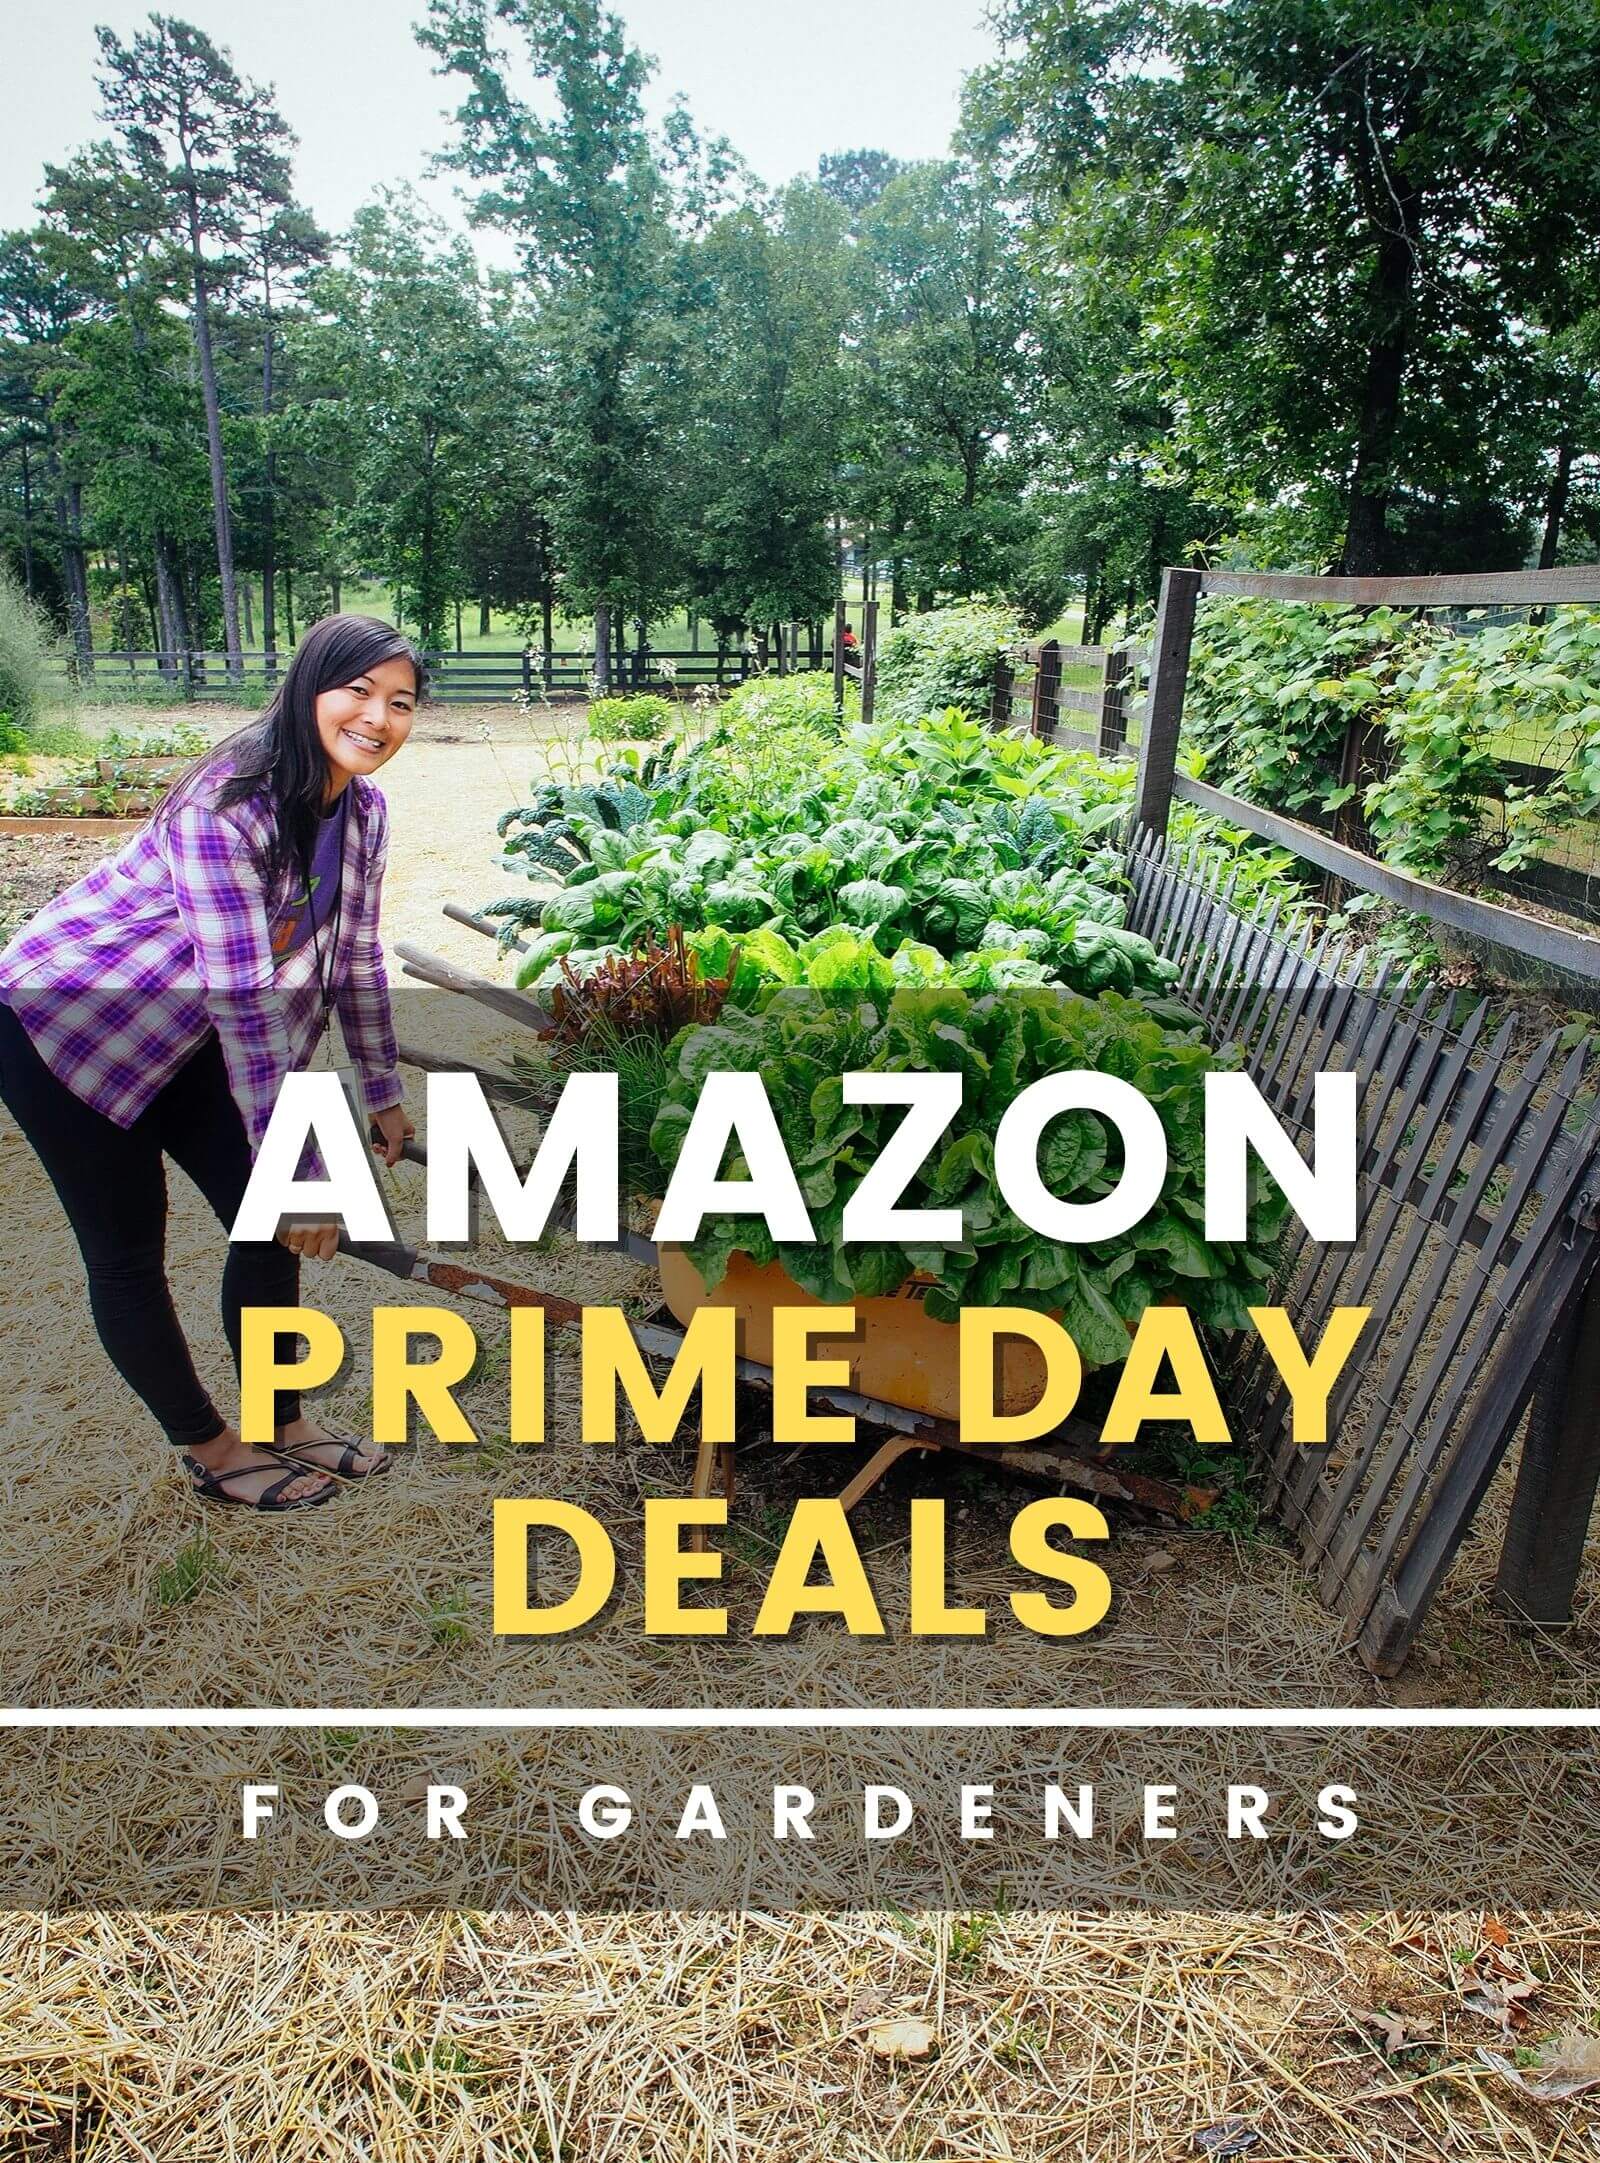 Amazon Prime Day Deals for yard and gardening supplies